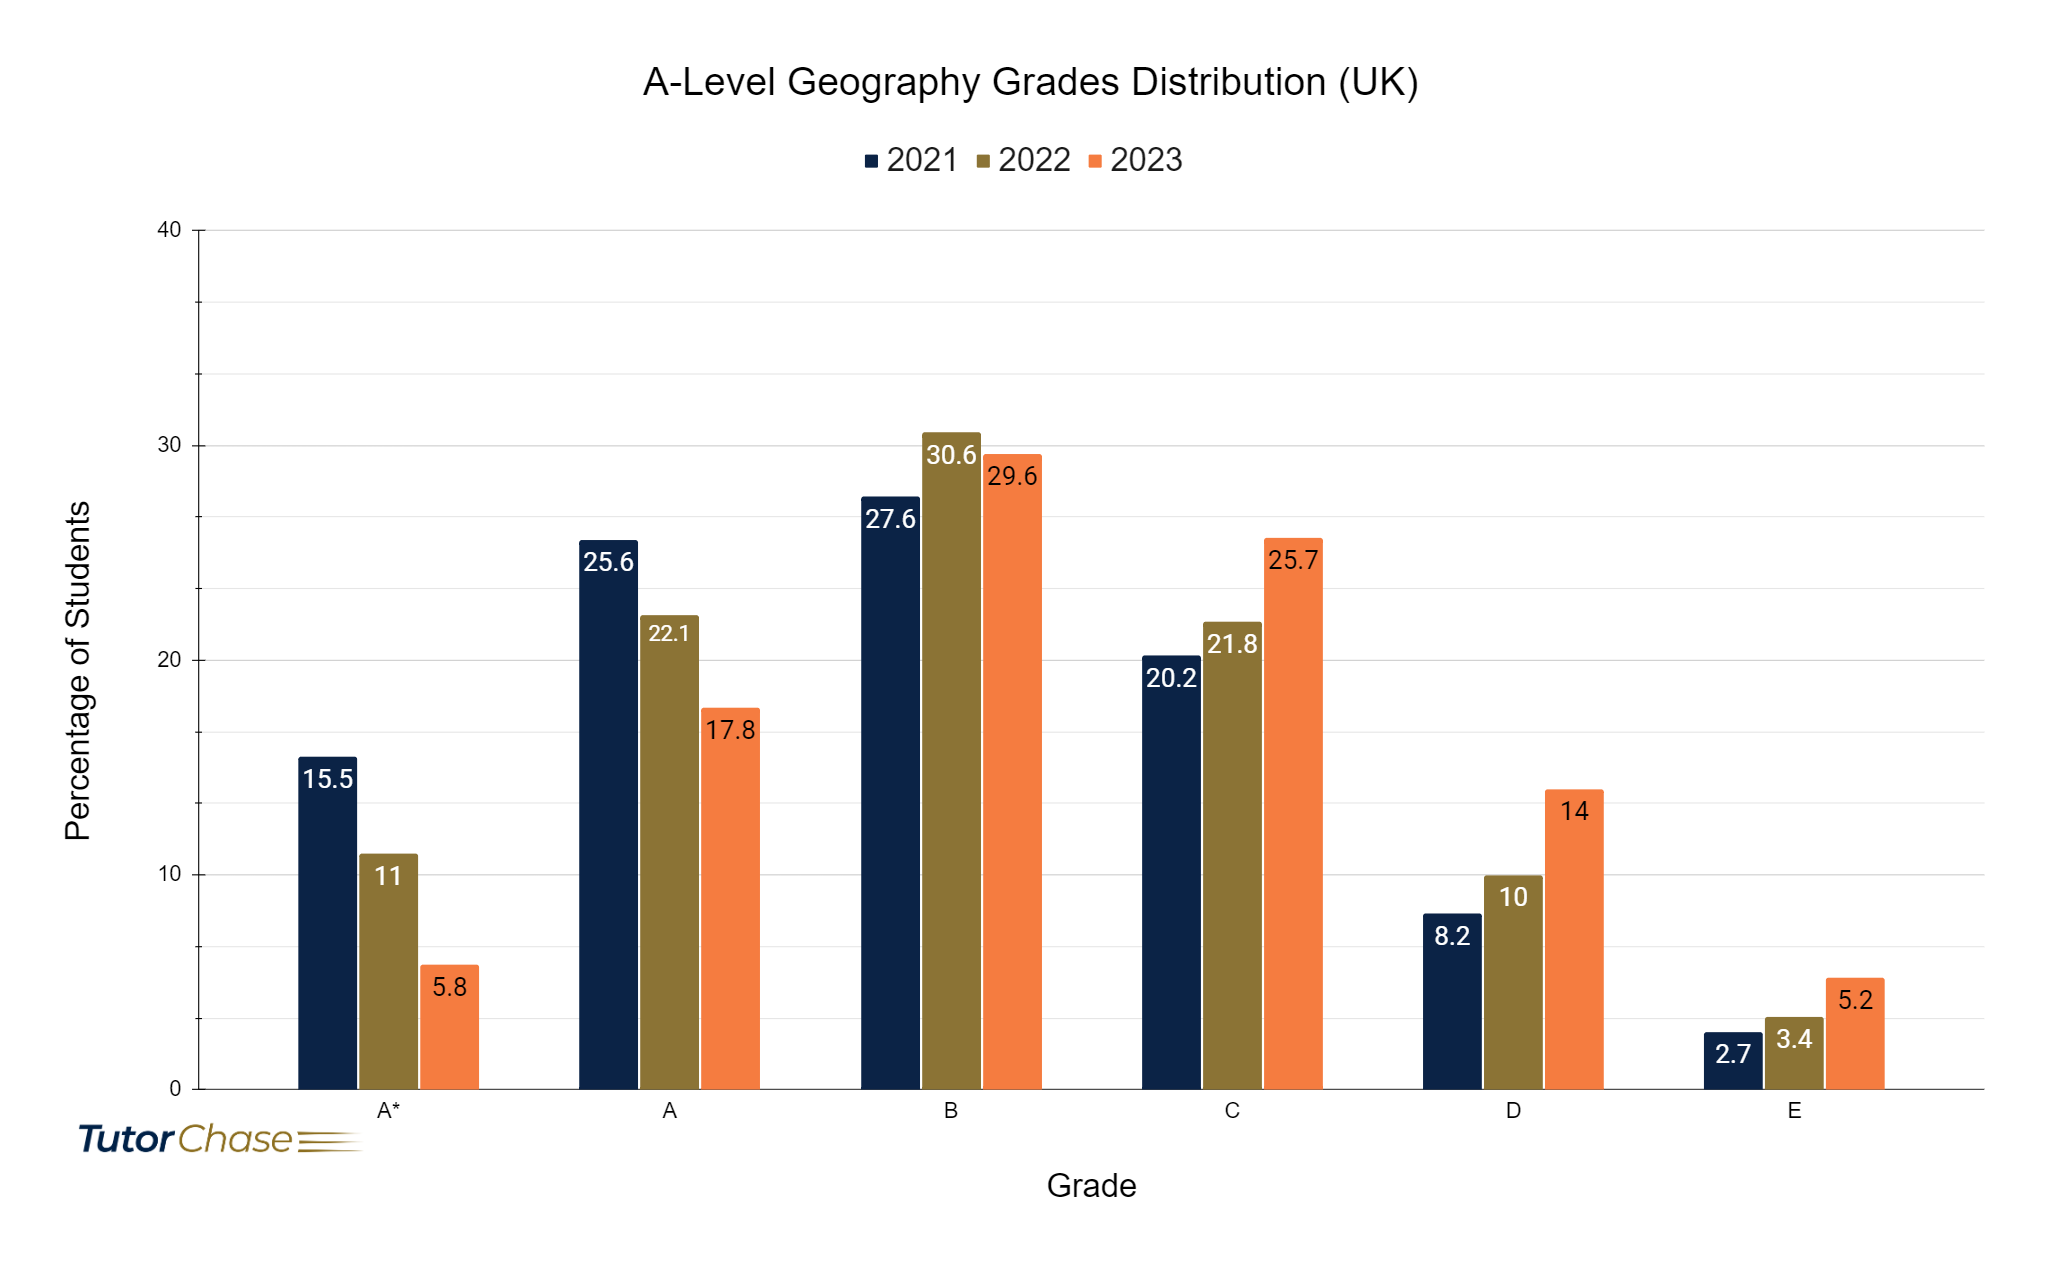 Grades distribution of A-Level Geography in UK 2021-2023